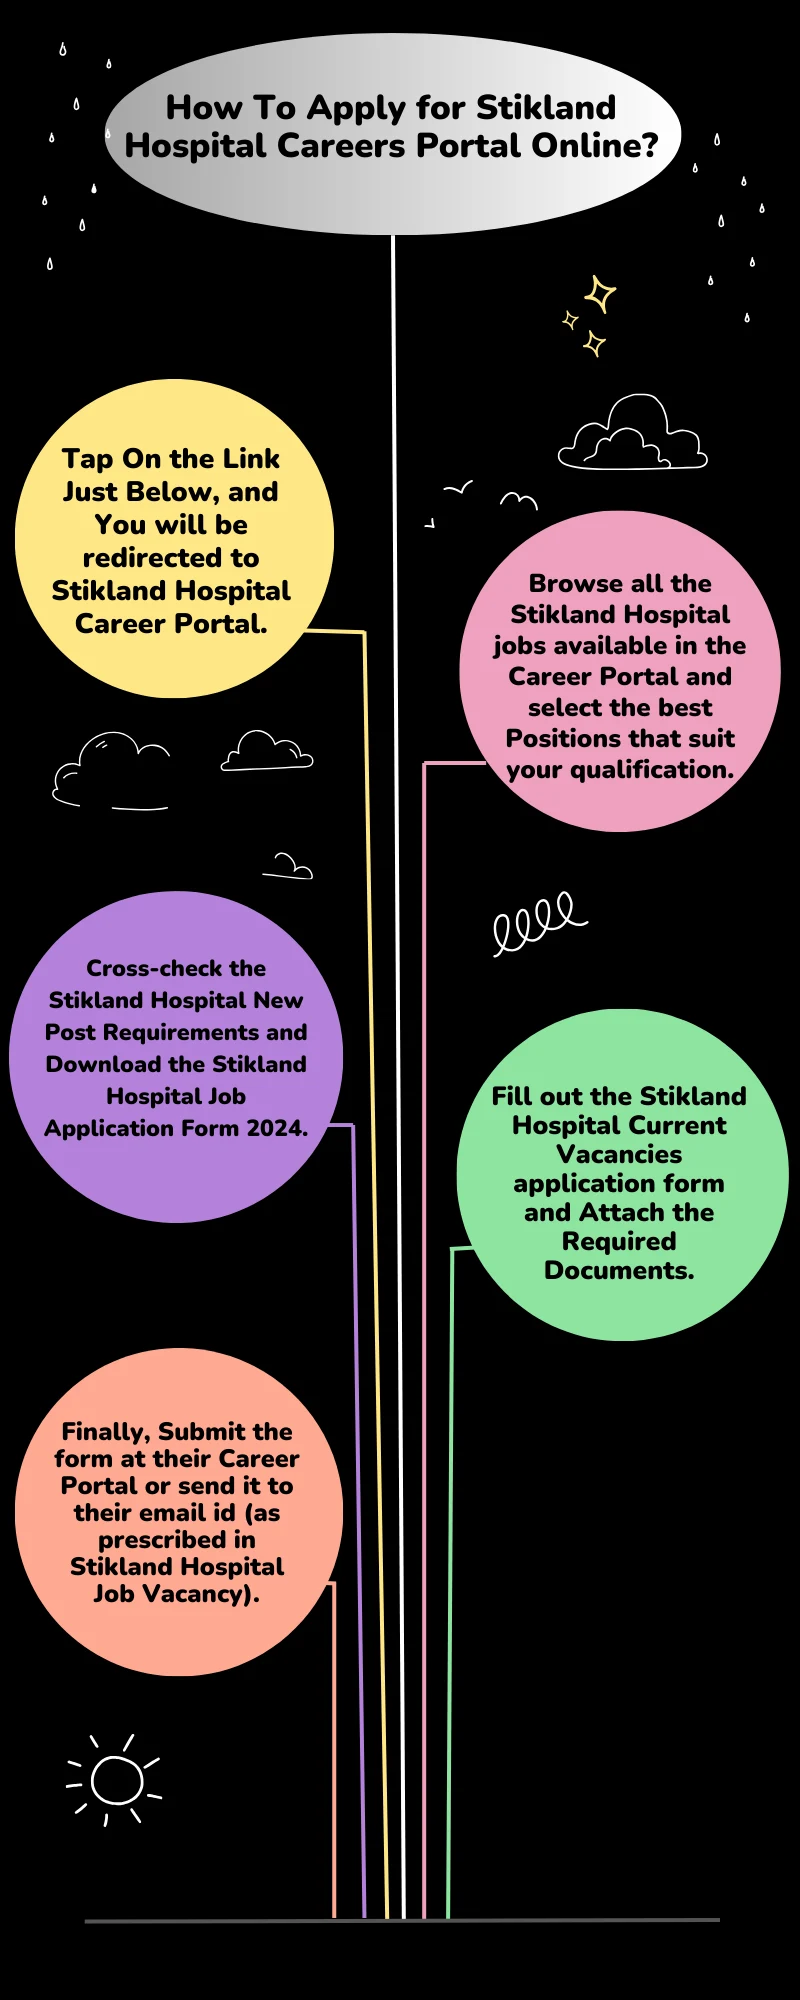 How To Apply for Stikland Hospital Careers Portal Online?